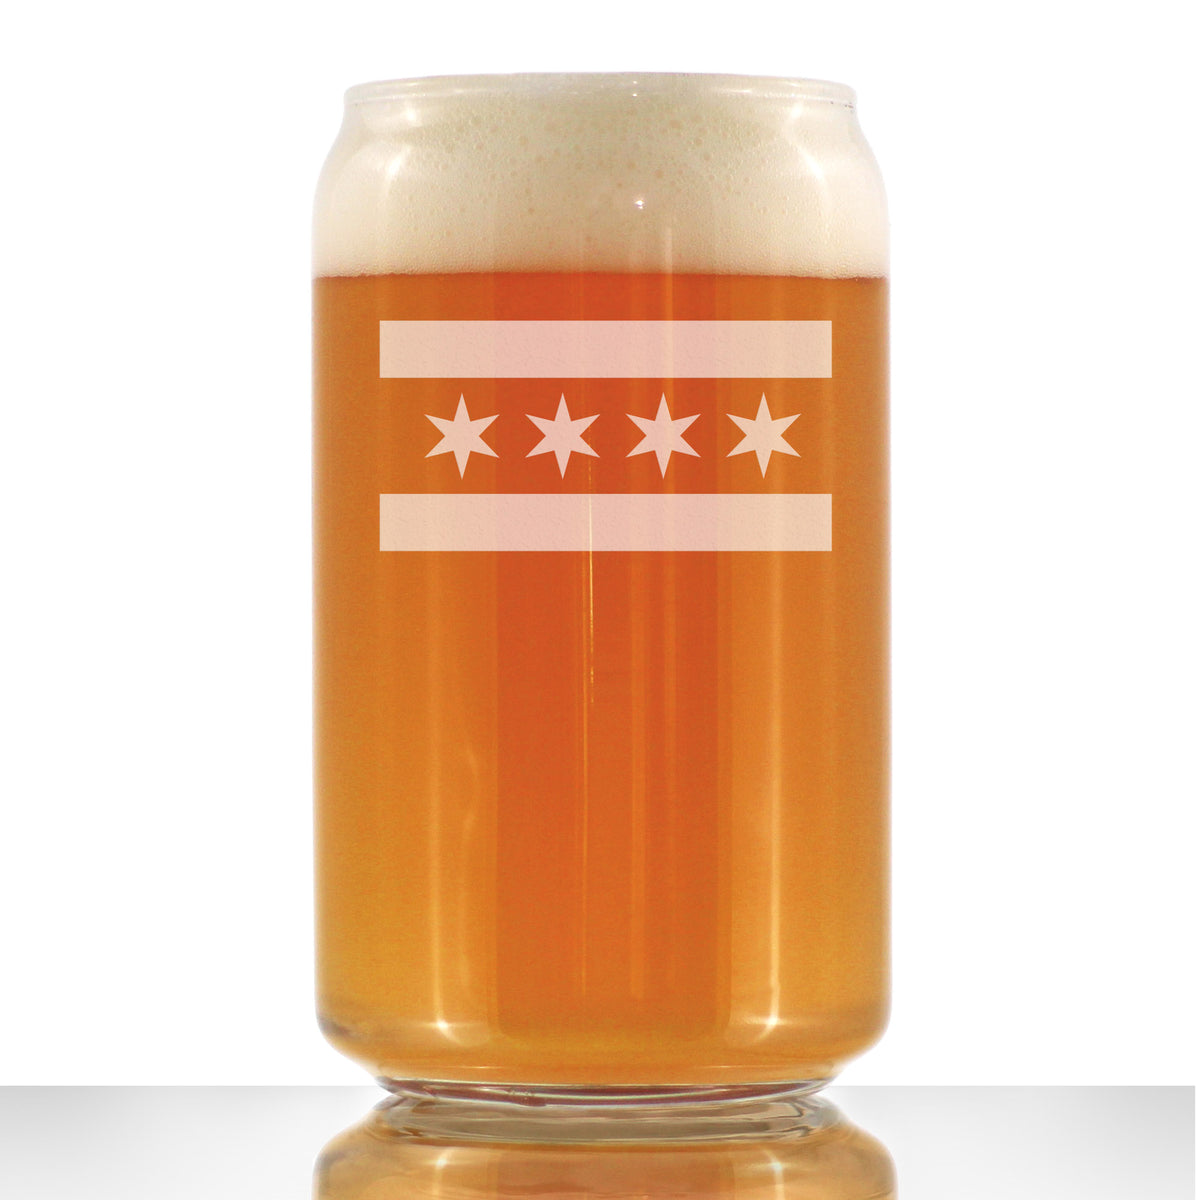 Chicago Flag - Fun Beer Can Pint Glass Gift for Chitown Lovers - Cute Chicago Themed Decor - 16 oz Drinking Glasses